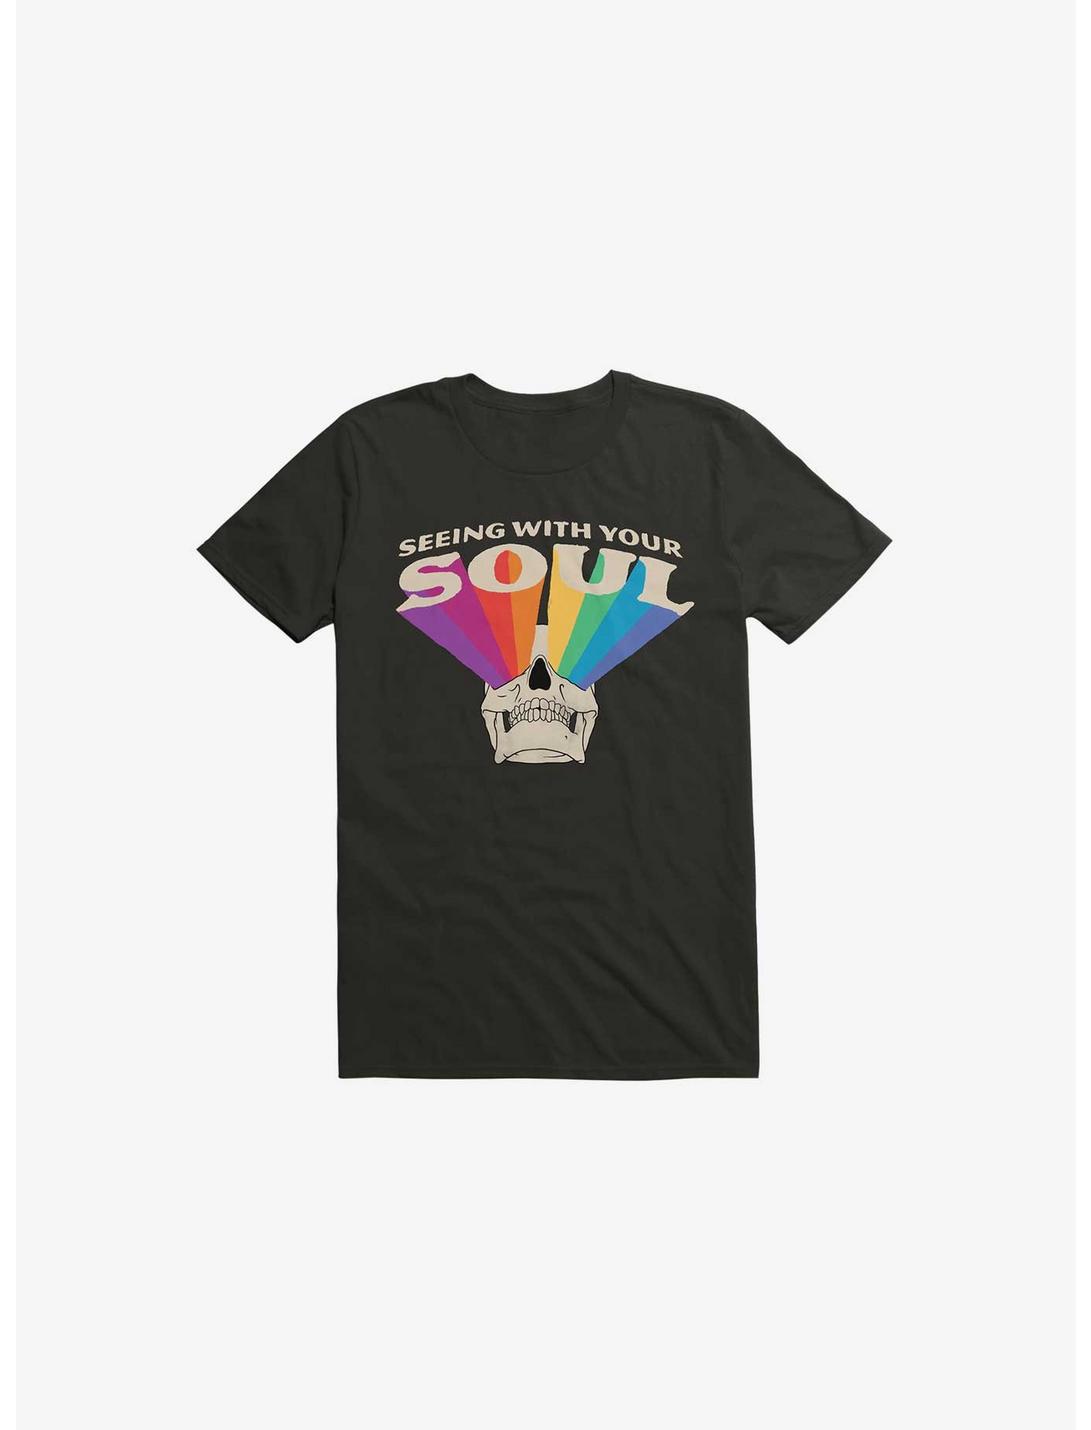 Seeing With Your Soul Rainbow Skull Black T-Shirt, BLACK, hi-res